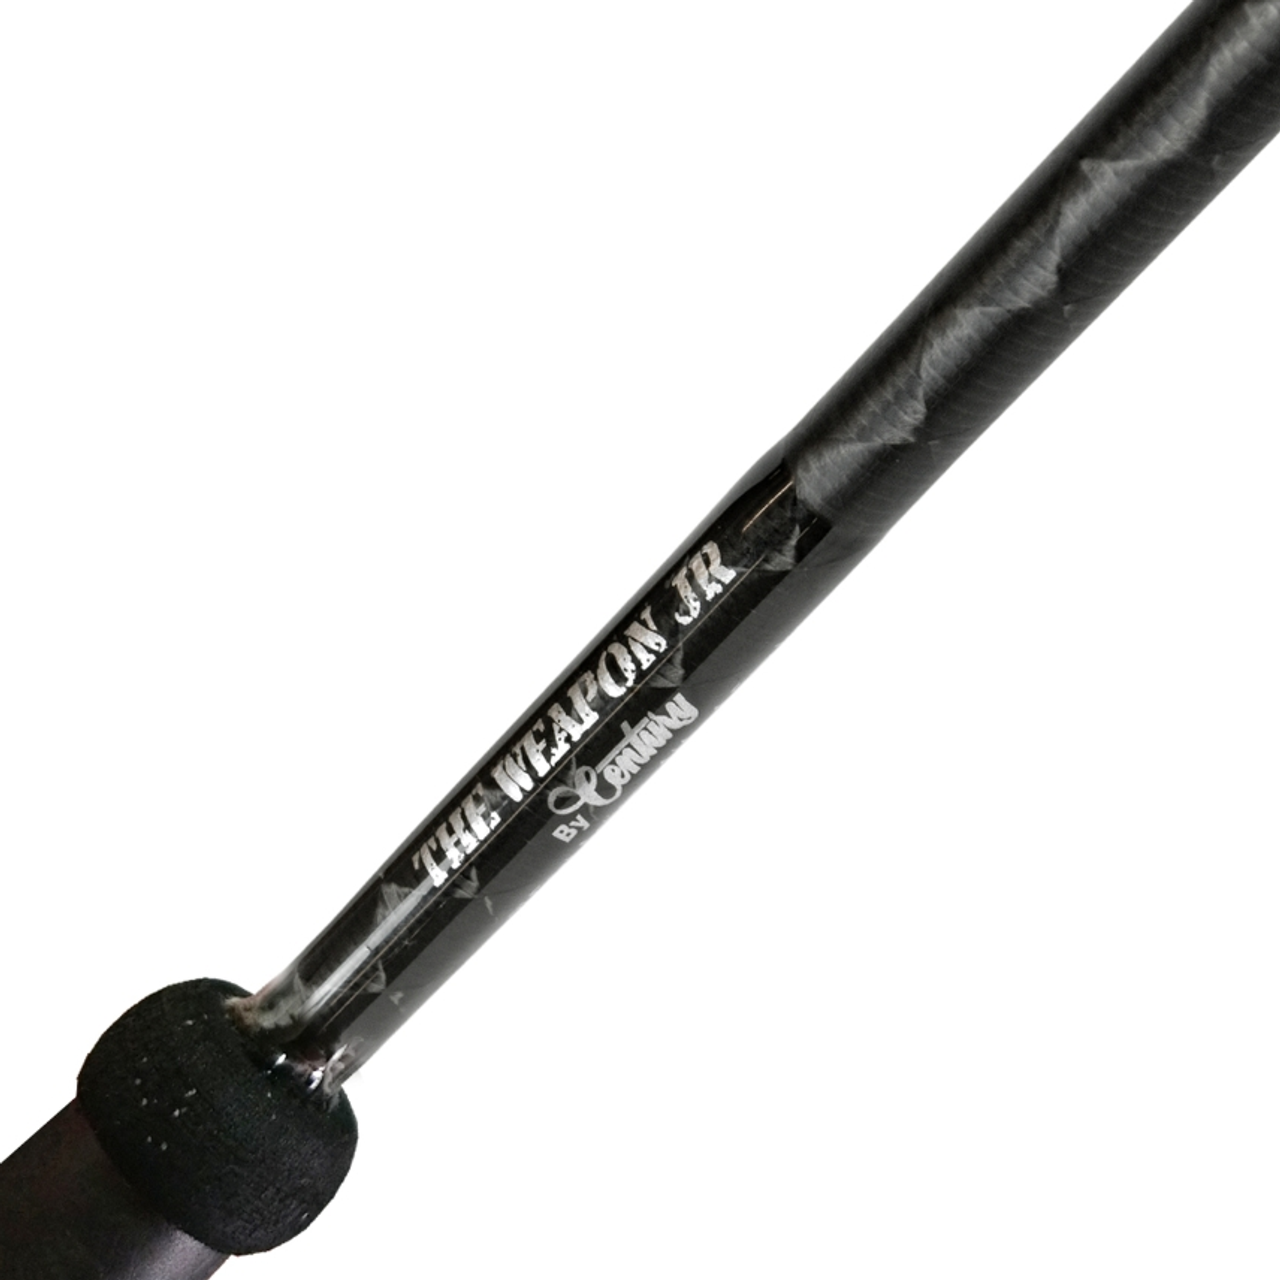 Century Rods The Weapon Jr. Spinning Rod 7'6 1/4-2oz, Up to 25#ISS905FTS